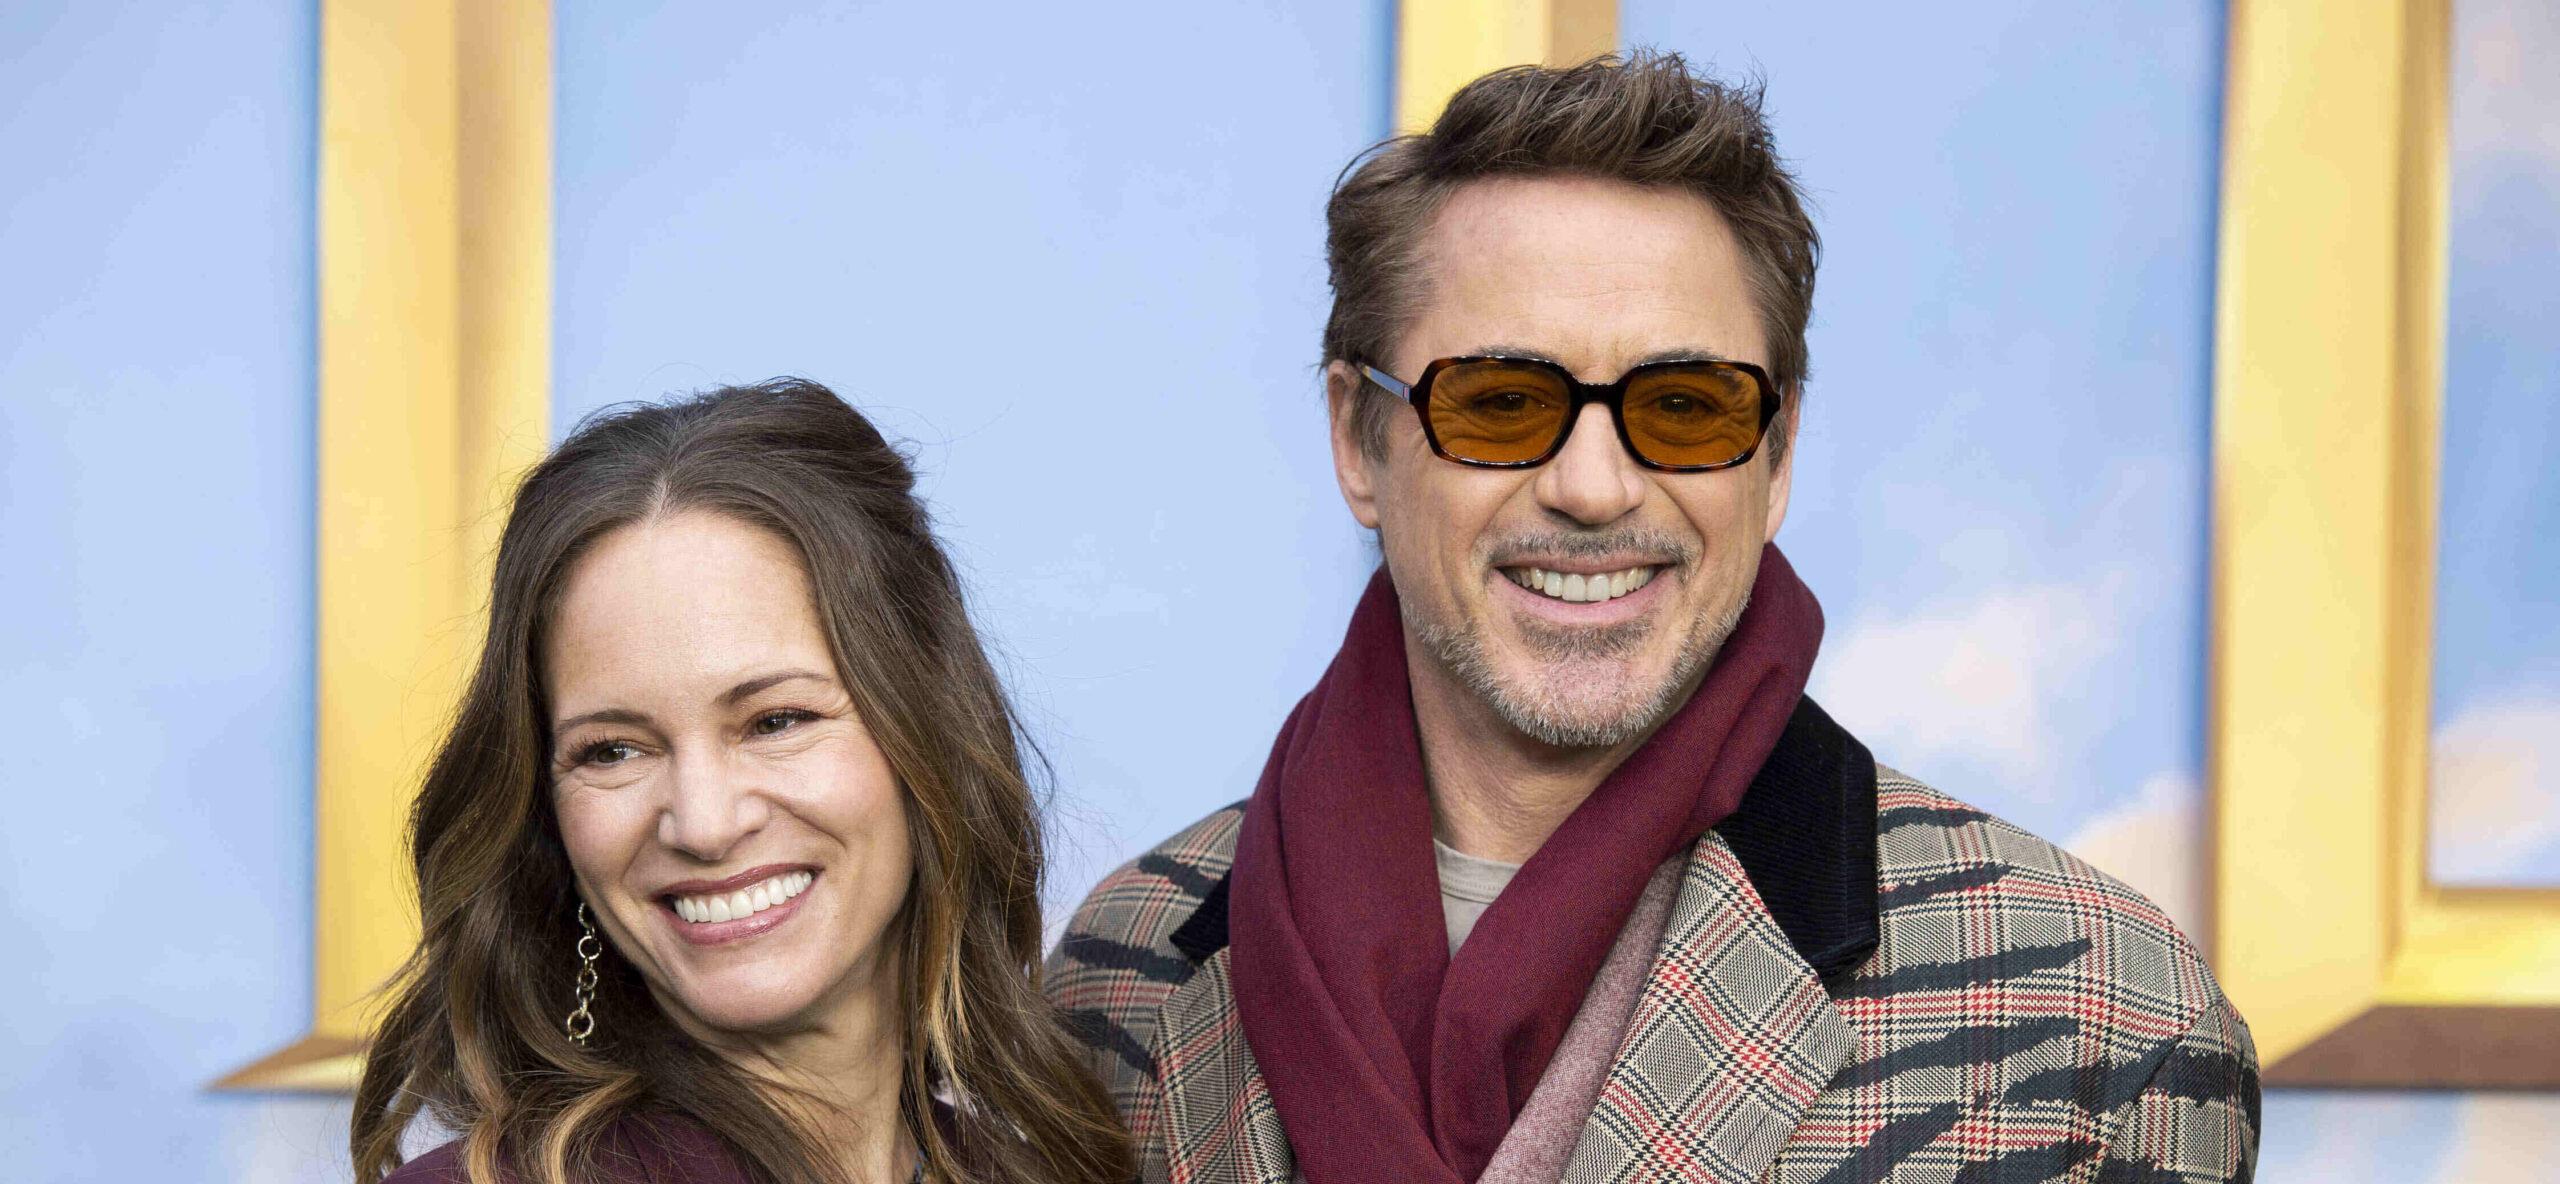 Robert Downey Jr and wife Susan Downey at the Dolittle Special Screening London